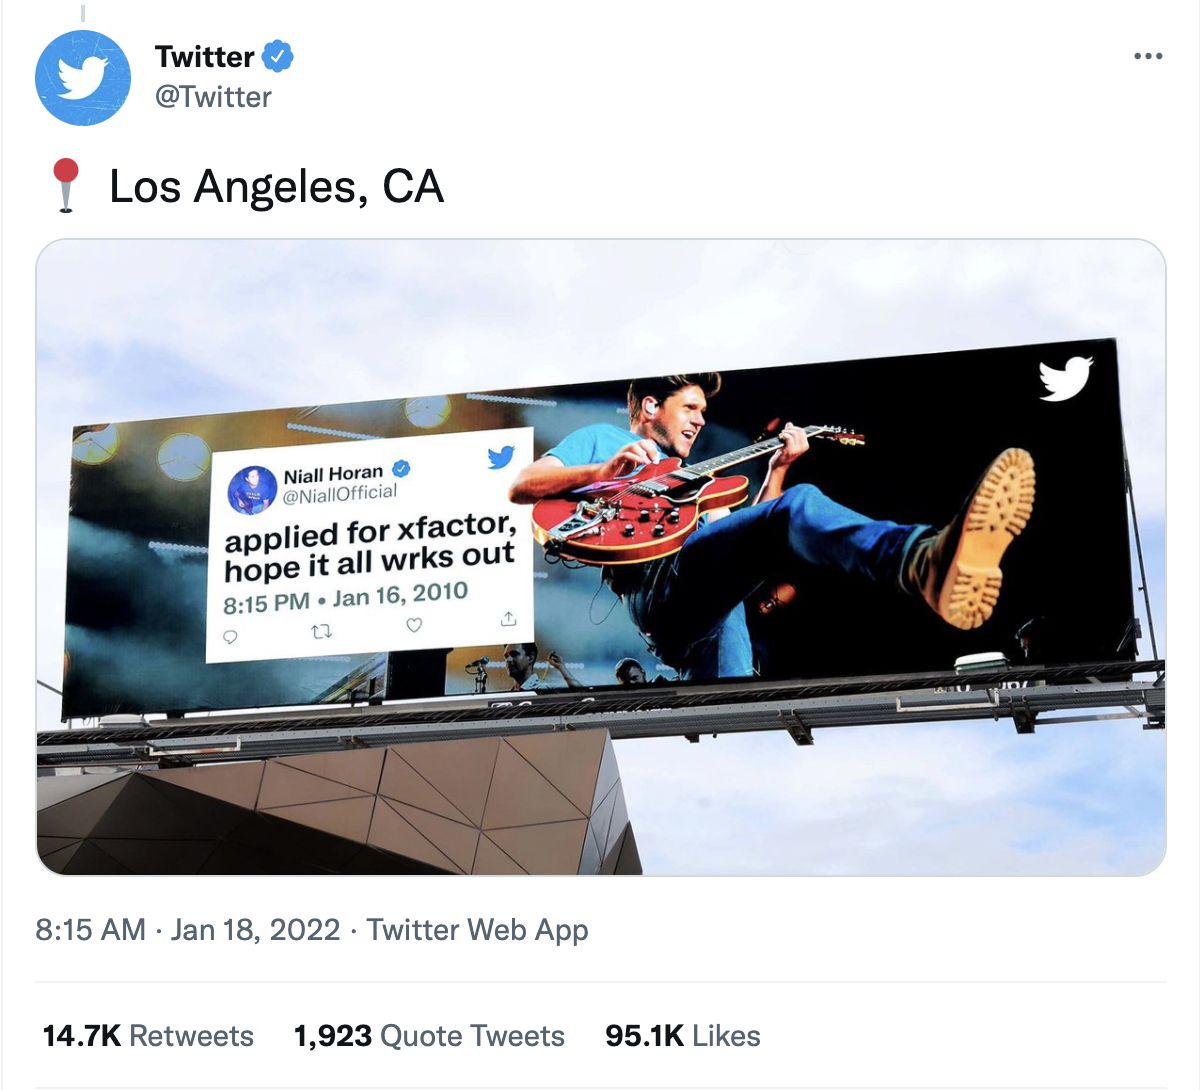 Twitter's "Tweet It Into Existence" billboard which was a viral marketing campaign